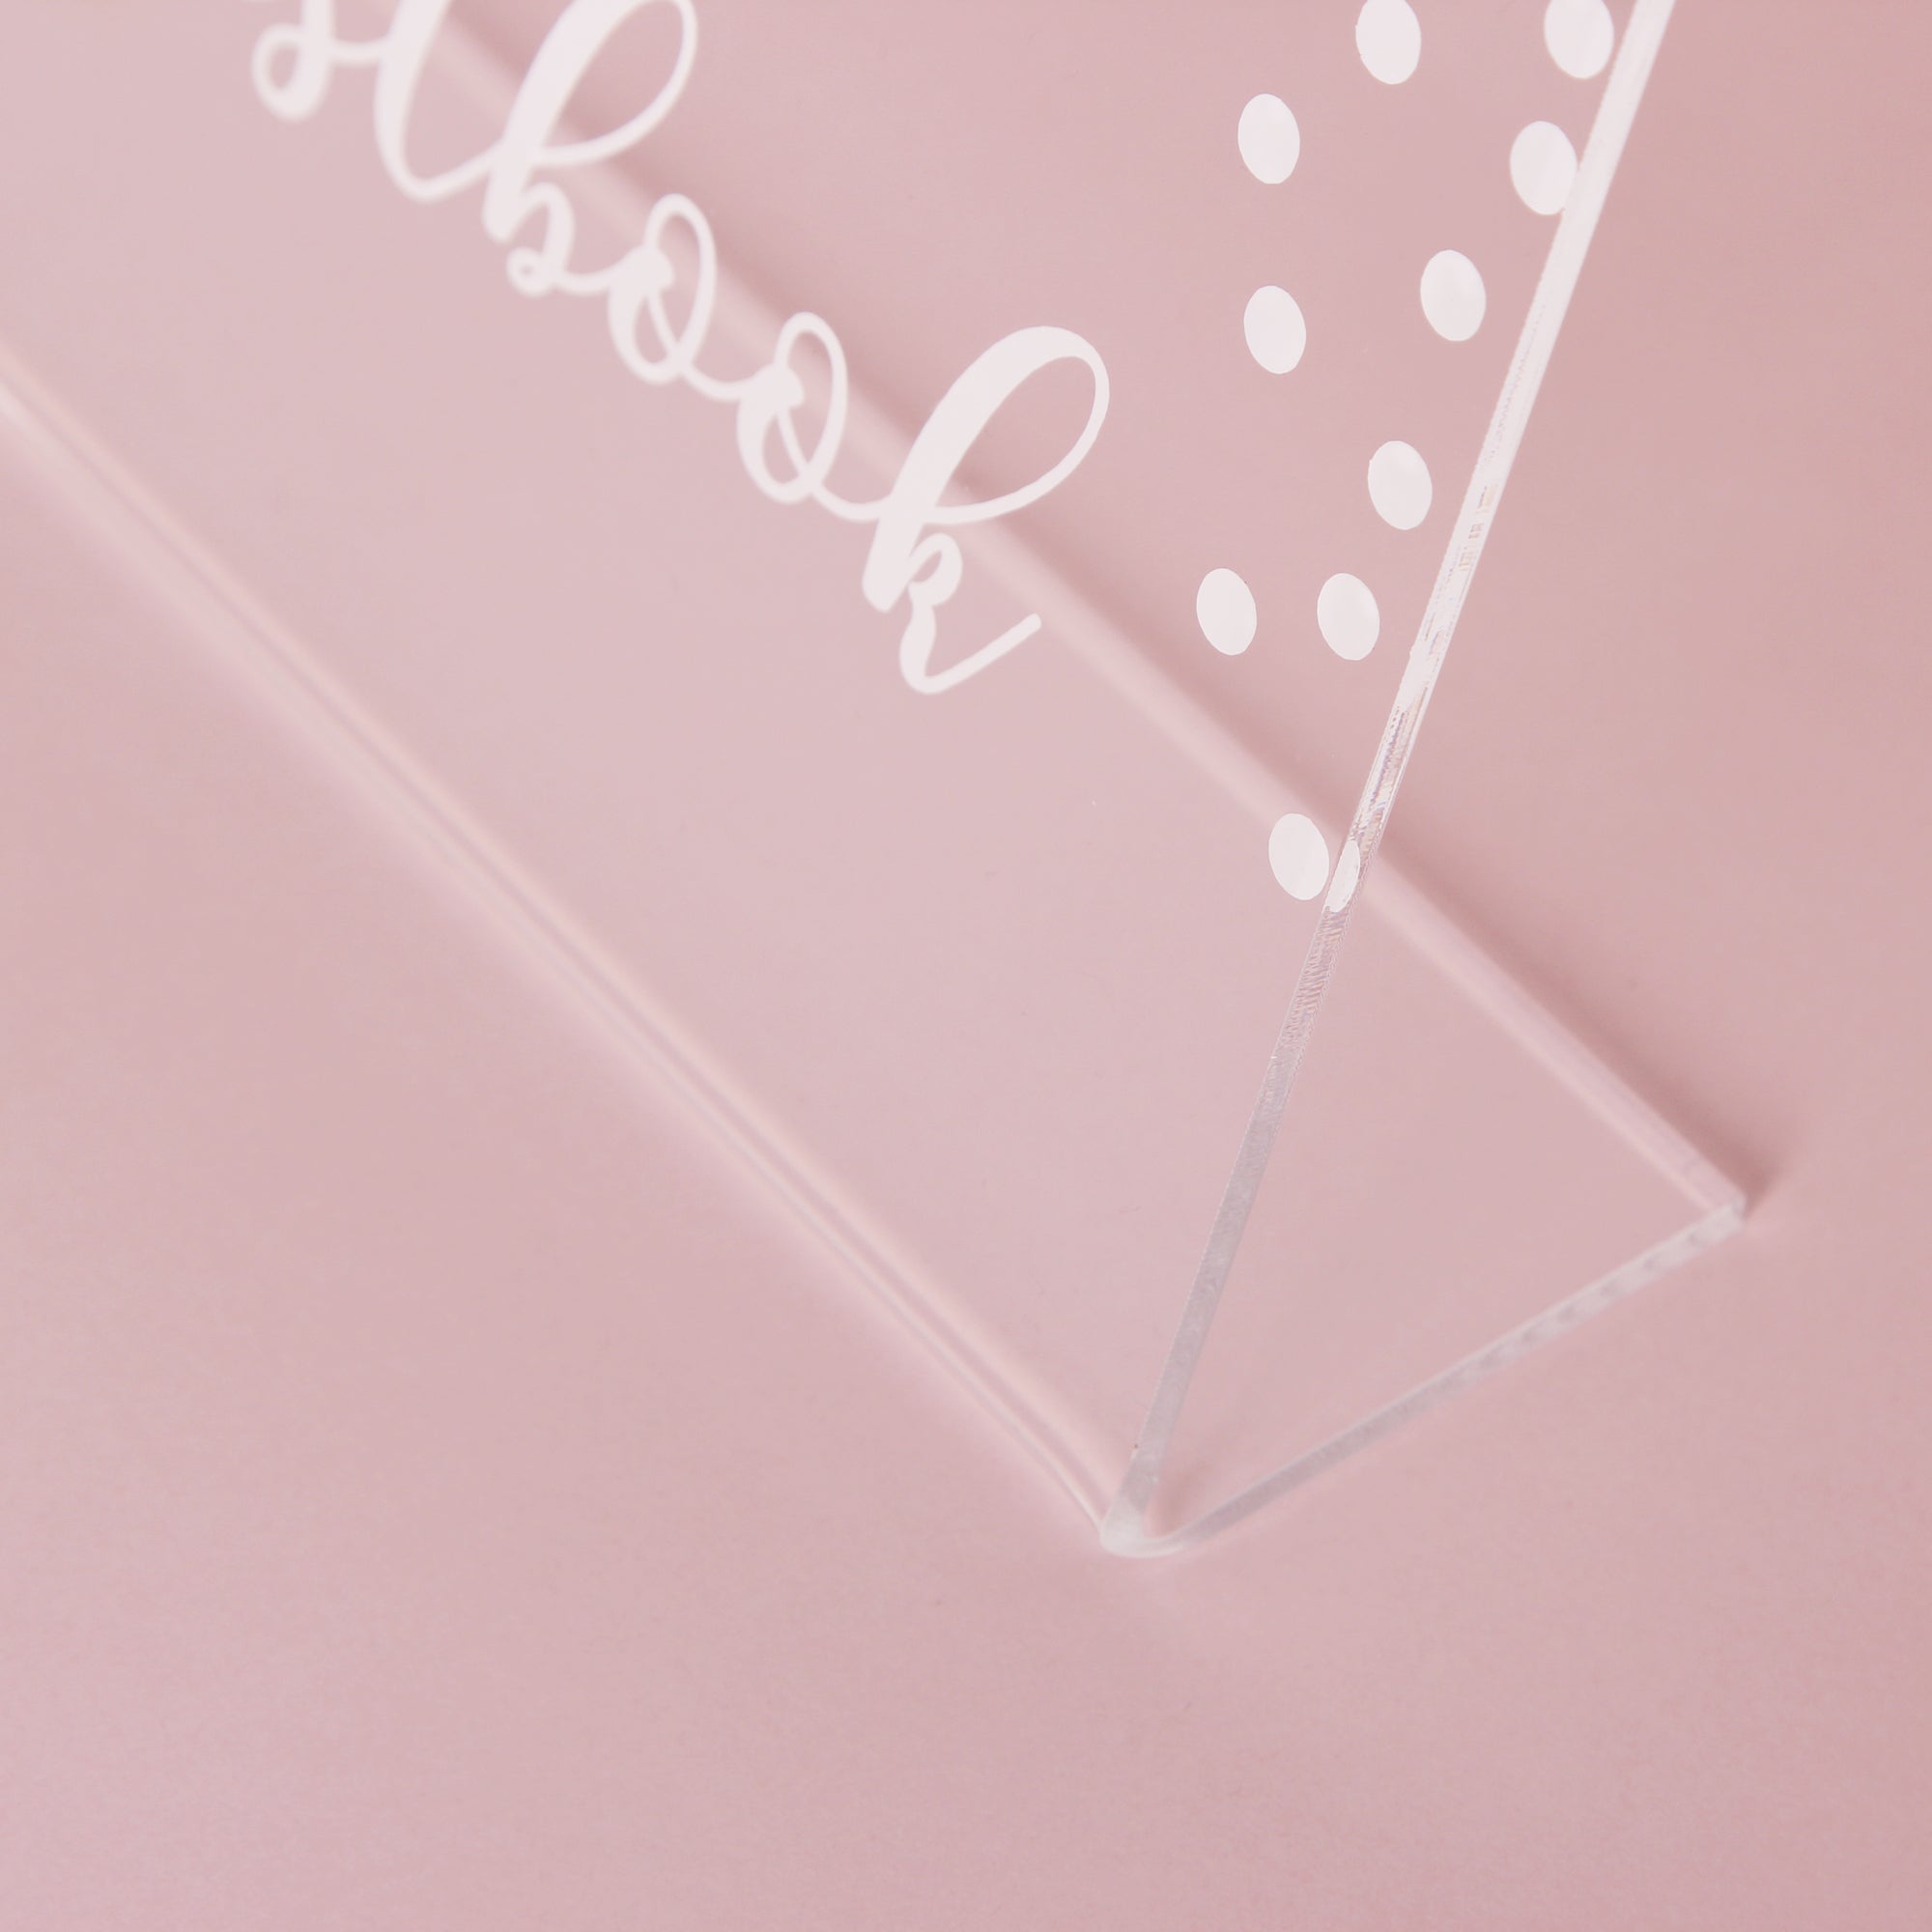 Acrylic Wedding Sign White with Dots- Guest book Glass Sign - Transperant Photo Guestbook Sign - Instax Photo Glass Sign - by Liumy - Liumy 